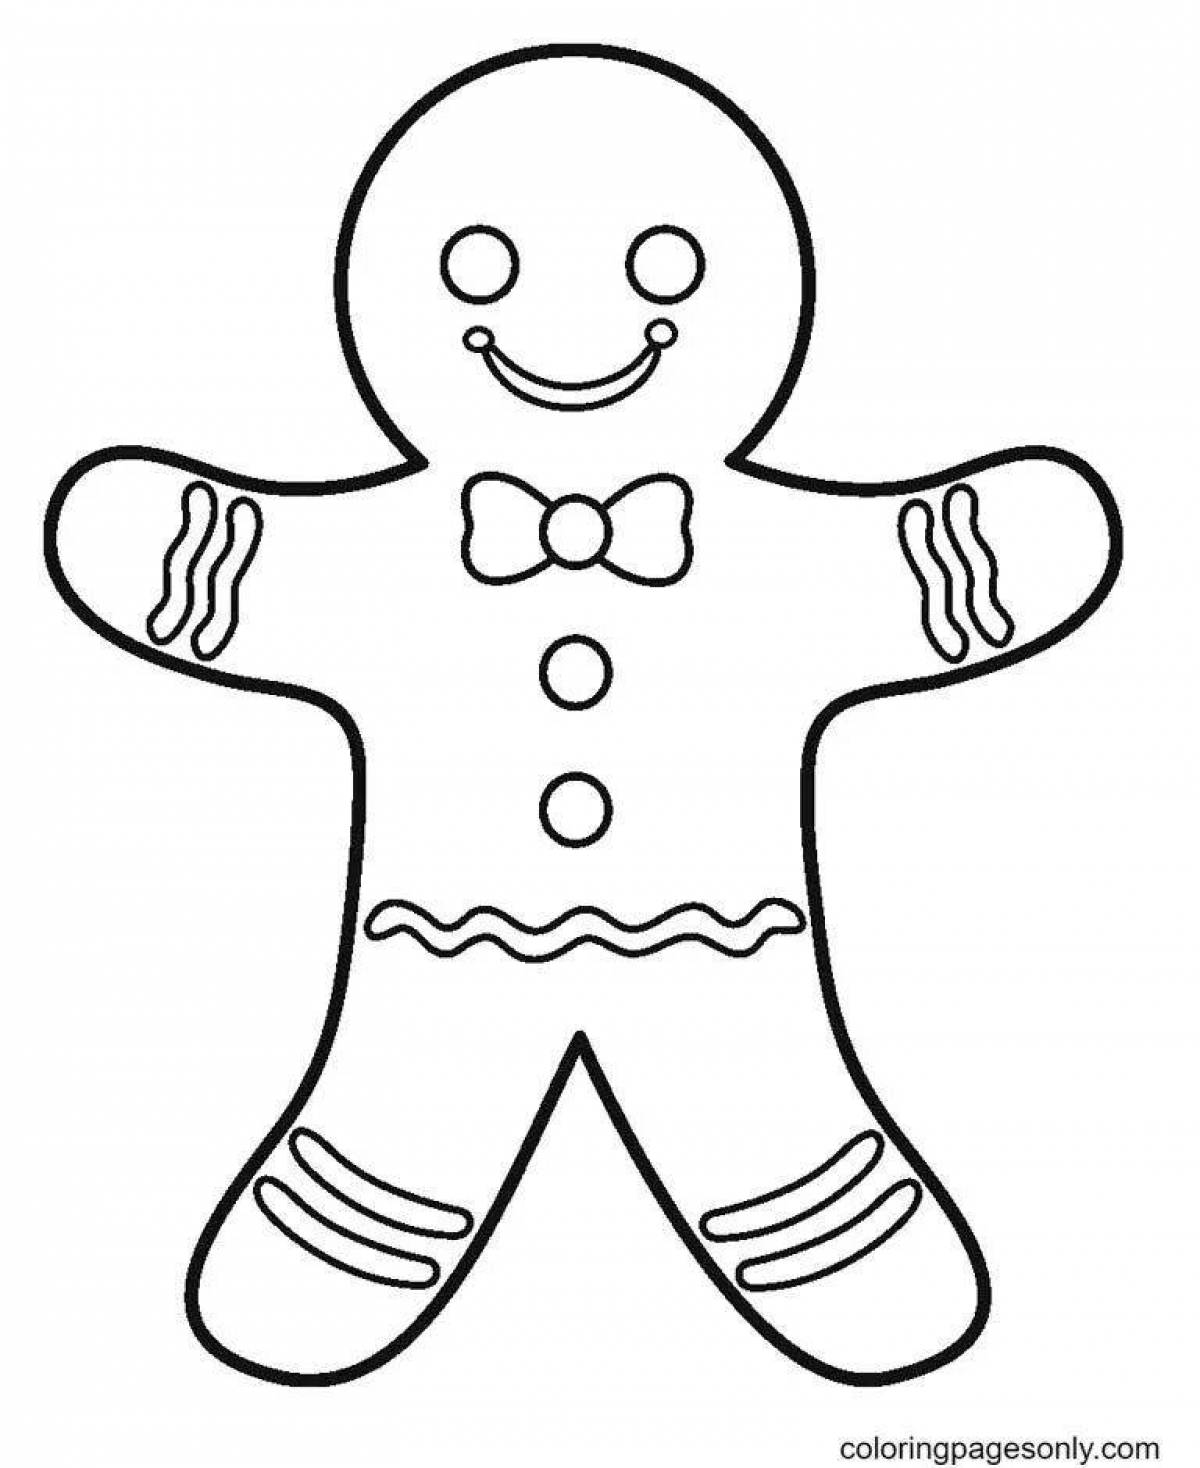 A playful Christmas gingerbread coloring book